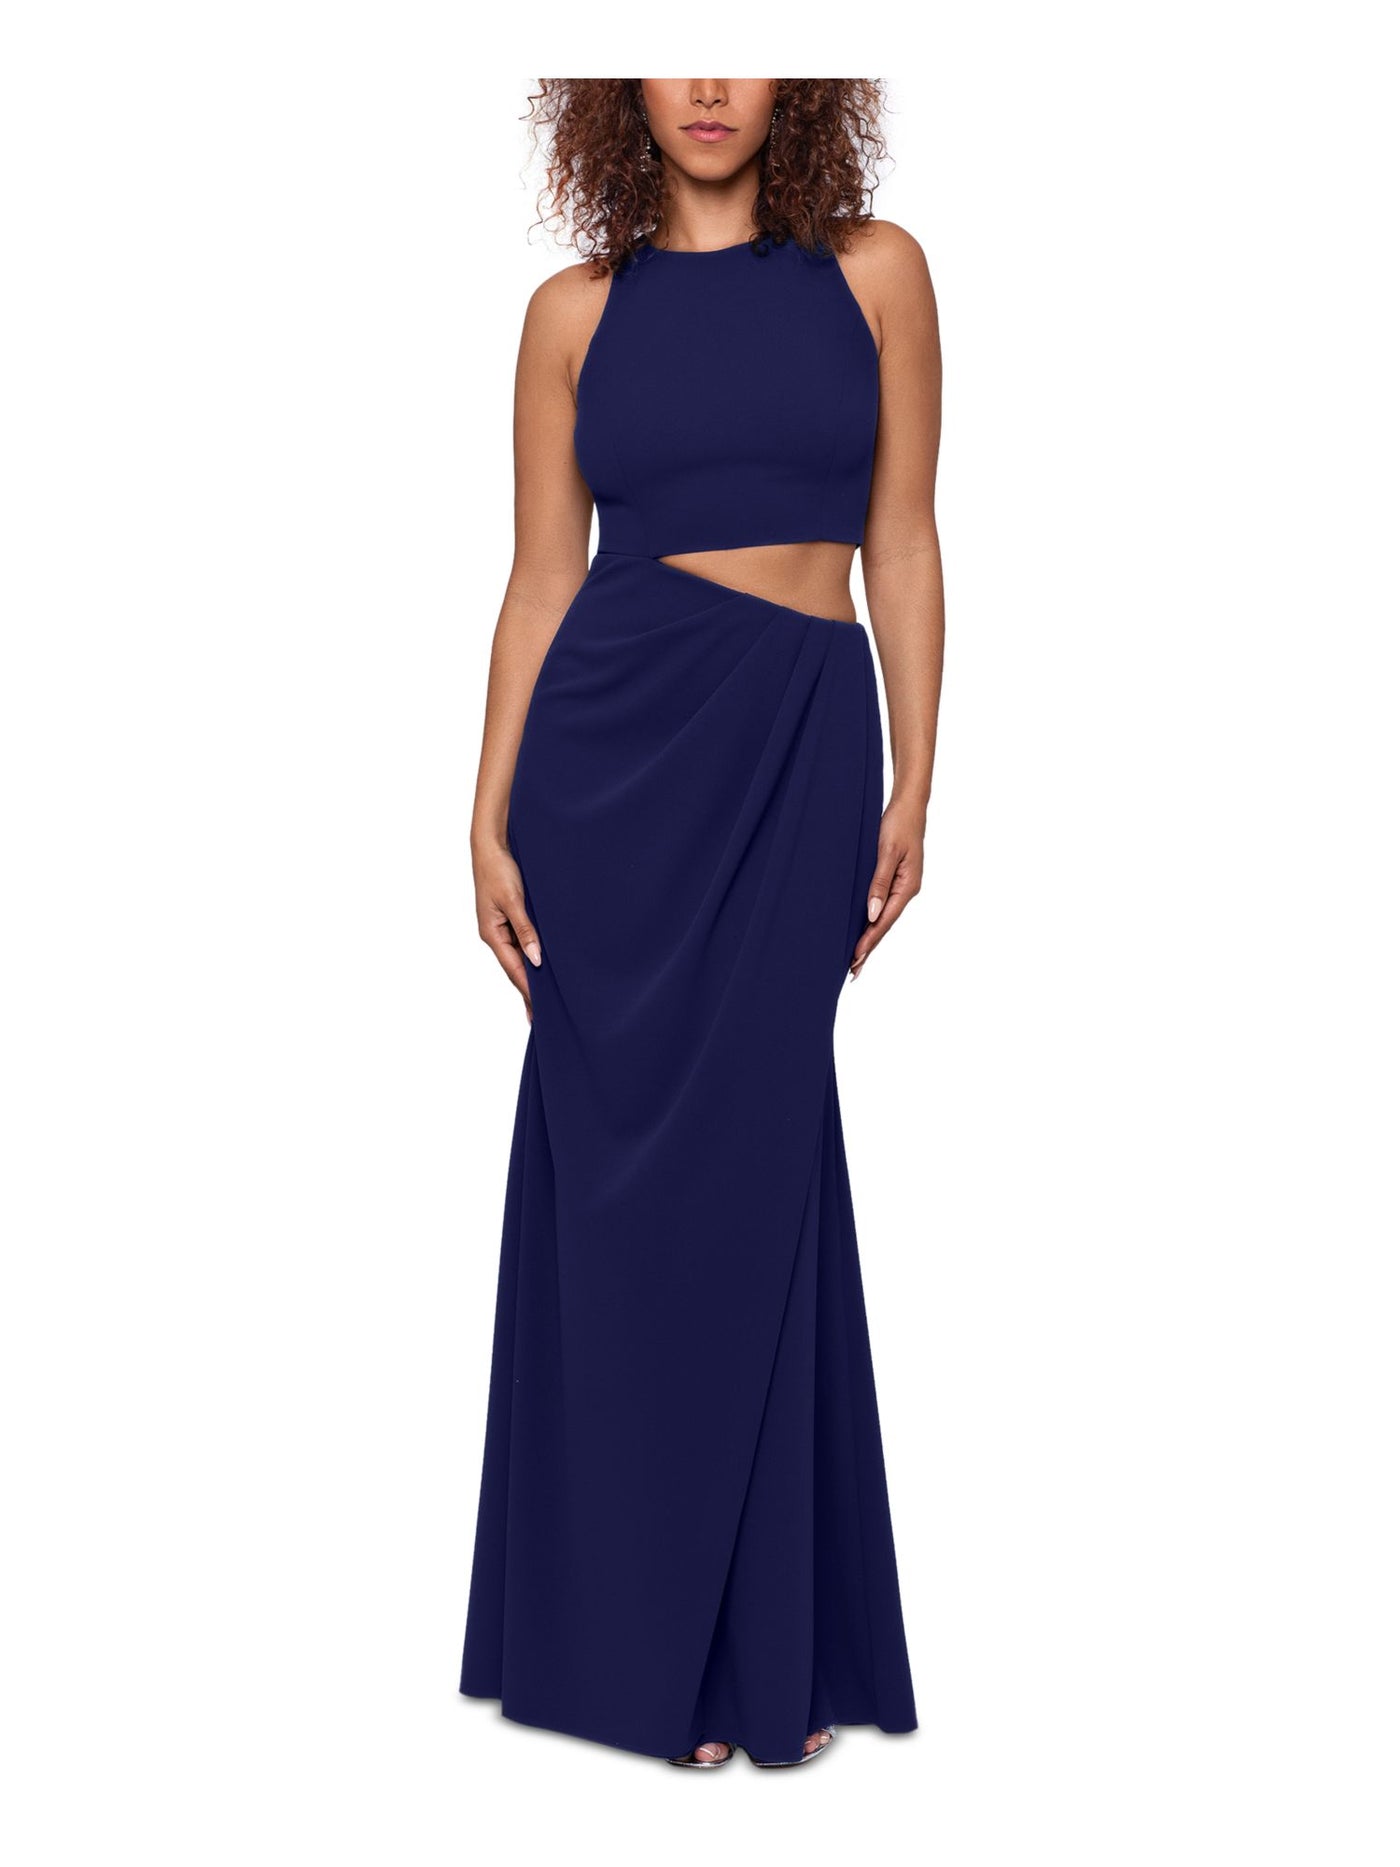 BETSY & ADAM Womens Navy Zippered Cut Out Lined Pleated Sleeveless Crew Neck Full-Length Formal Gown Dress 2